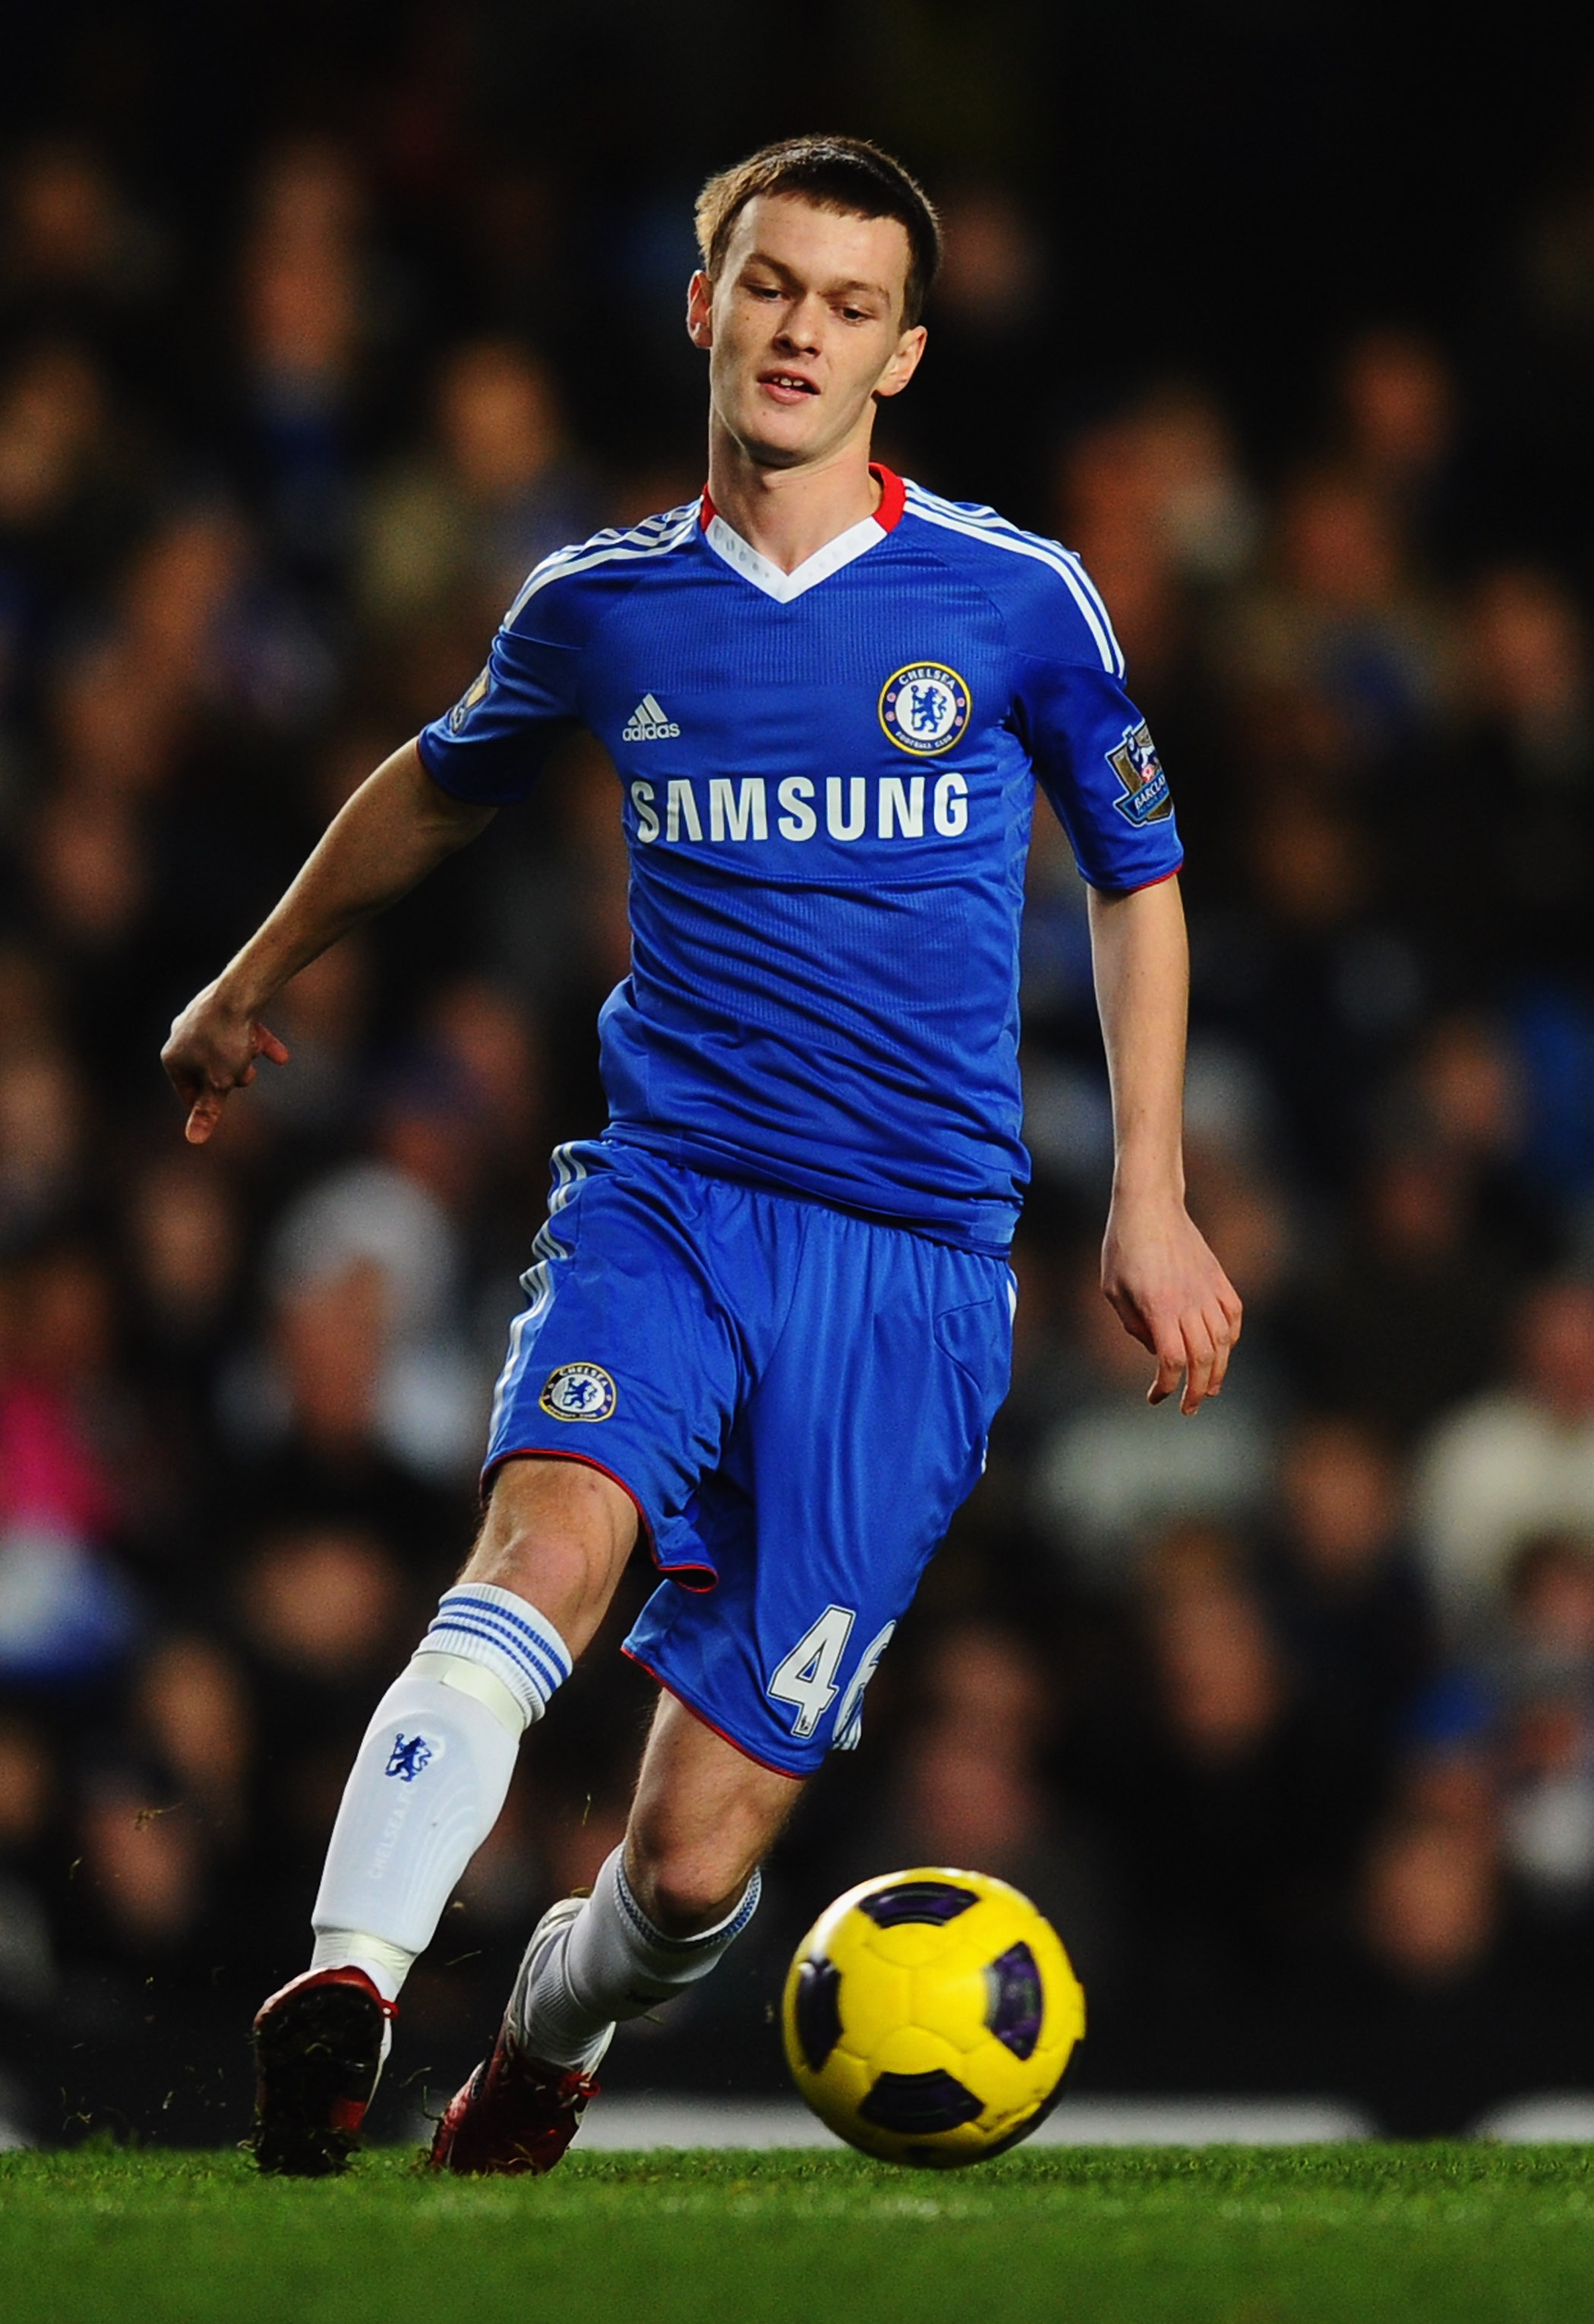 LONDON, ENGLAND - JANUARY 15:  Josh McEachran of Chelsea in action during the Barclays Premier League match between Chelsea and Blackburn Rovers at Stamford Bridge on January 15, 2011 in London, England.  (Photo by Mike Hewitt/Getty Images)